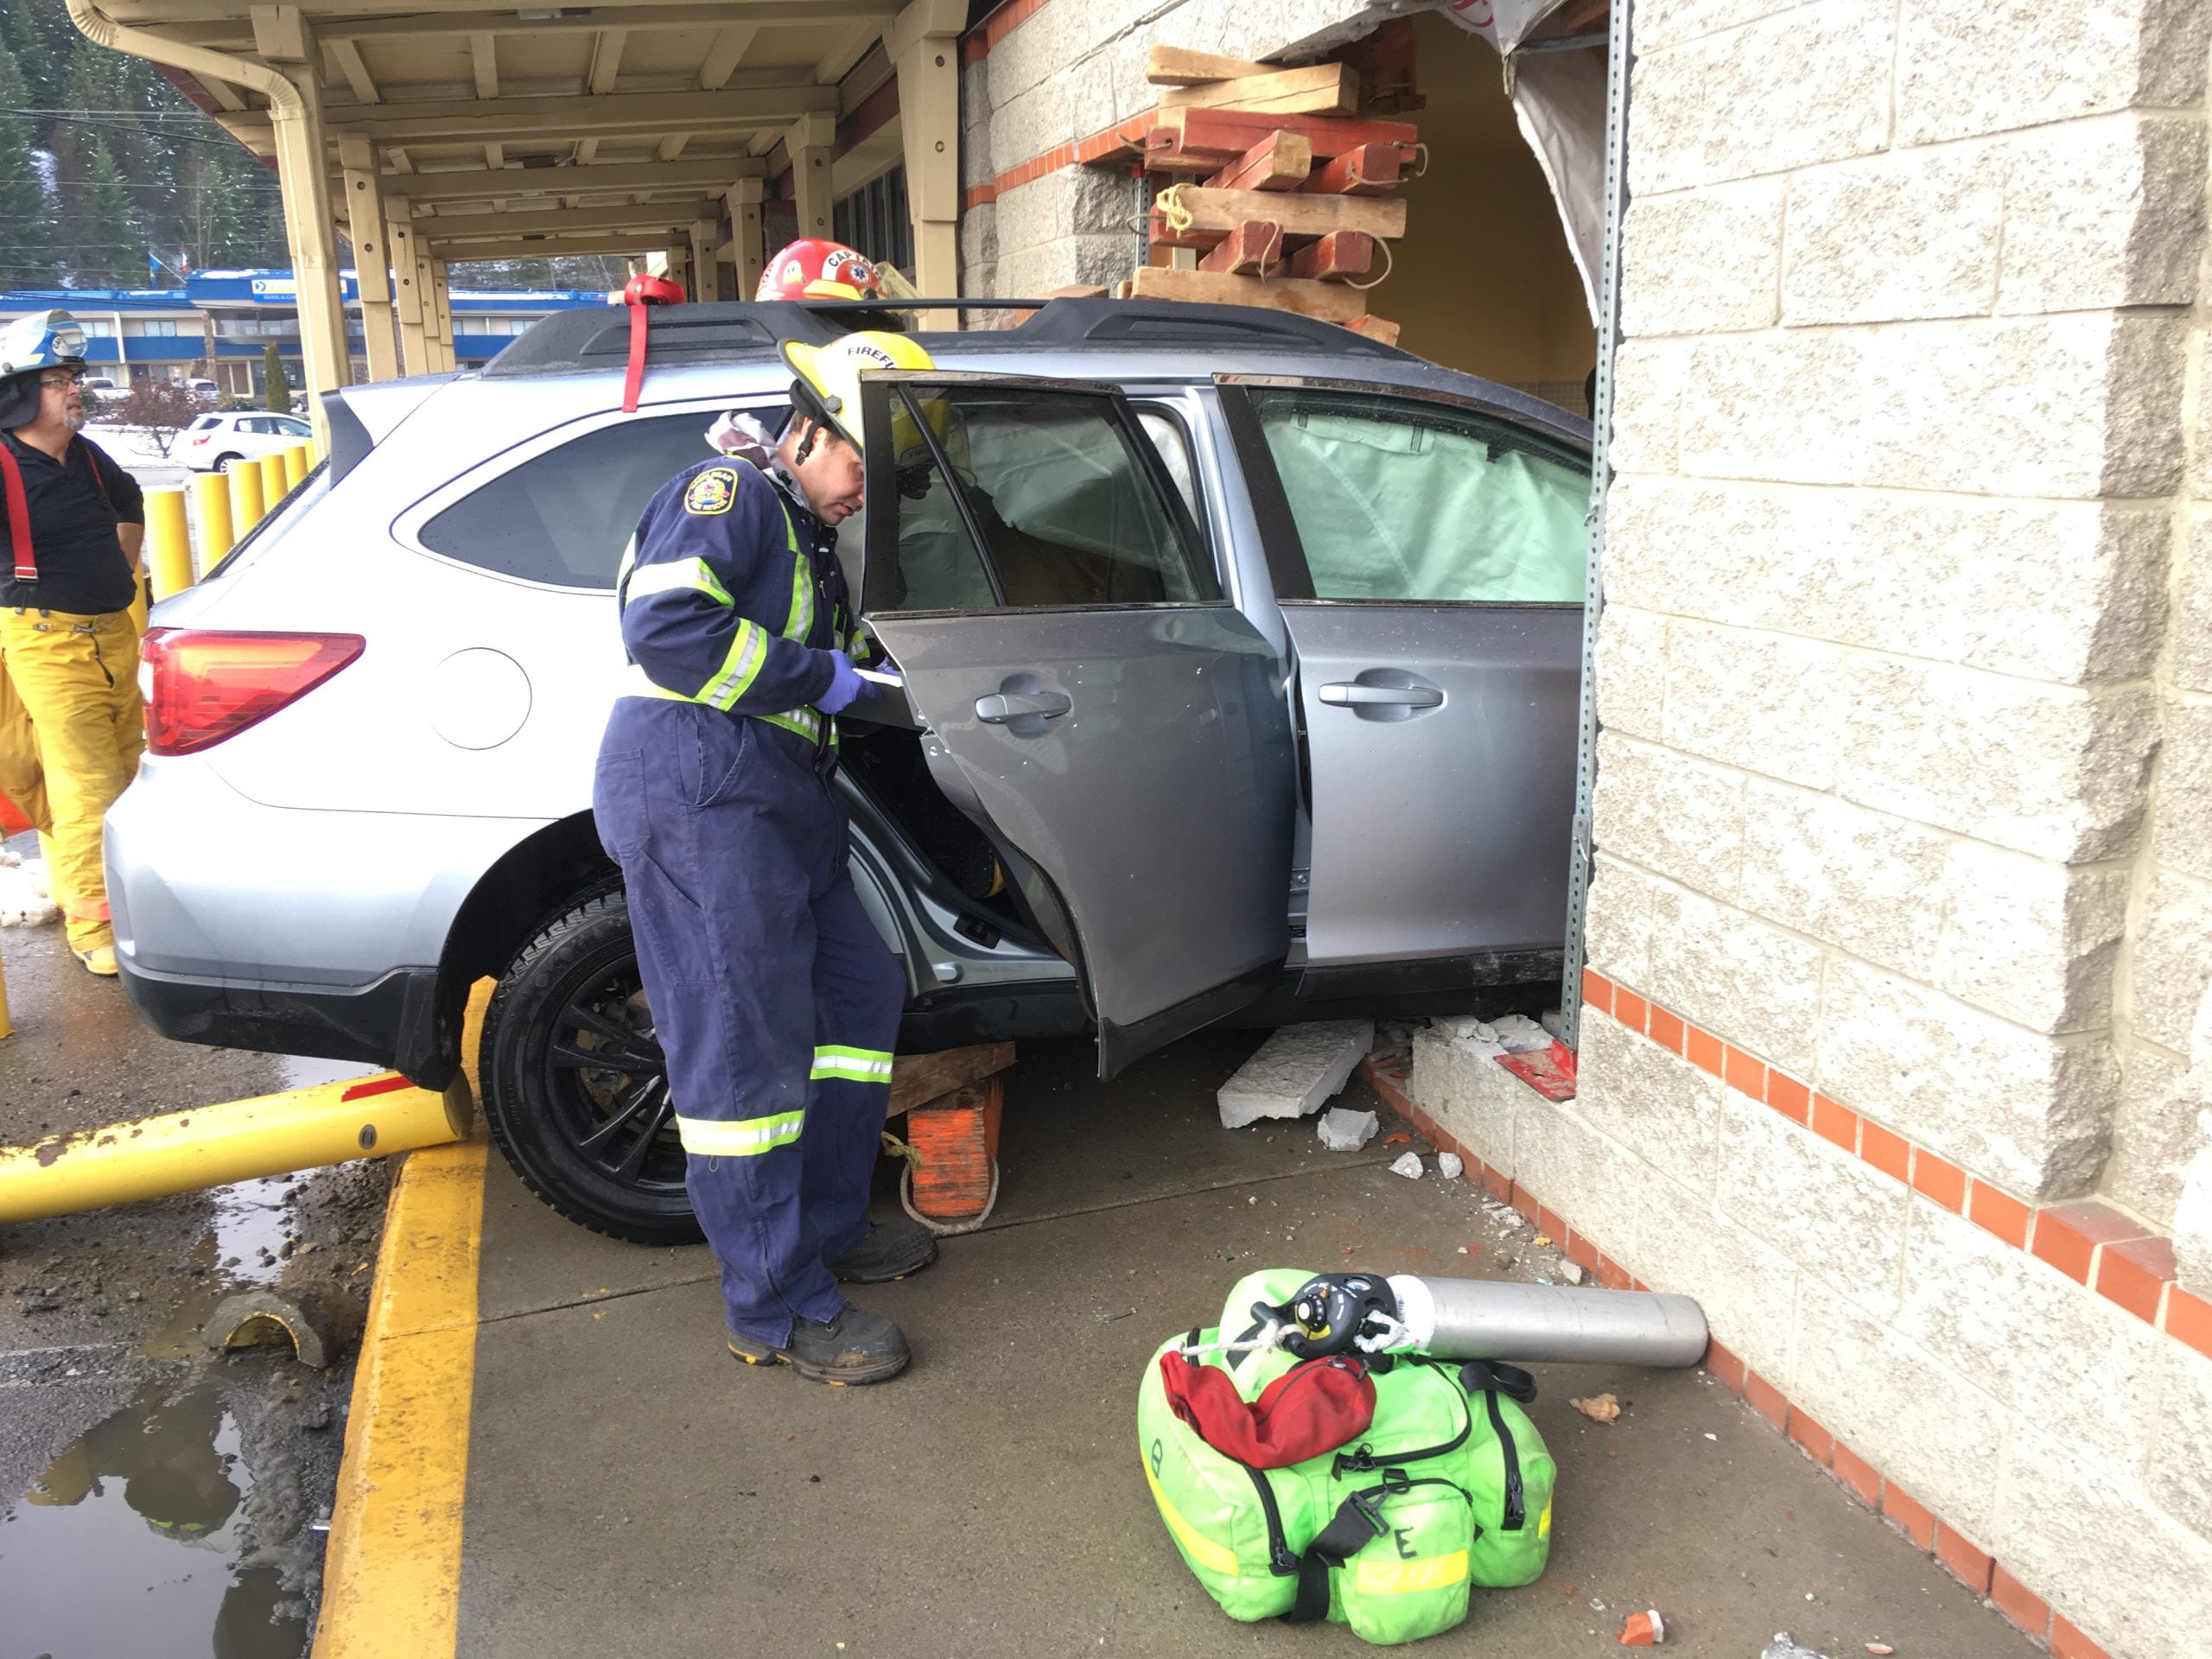 UPDATED: No one injured after car slams through wall of CIBC